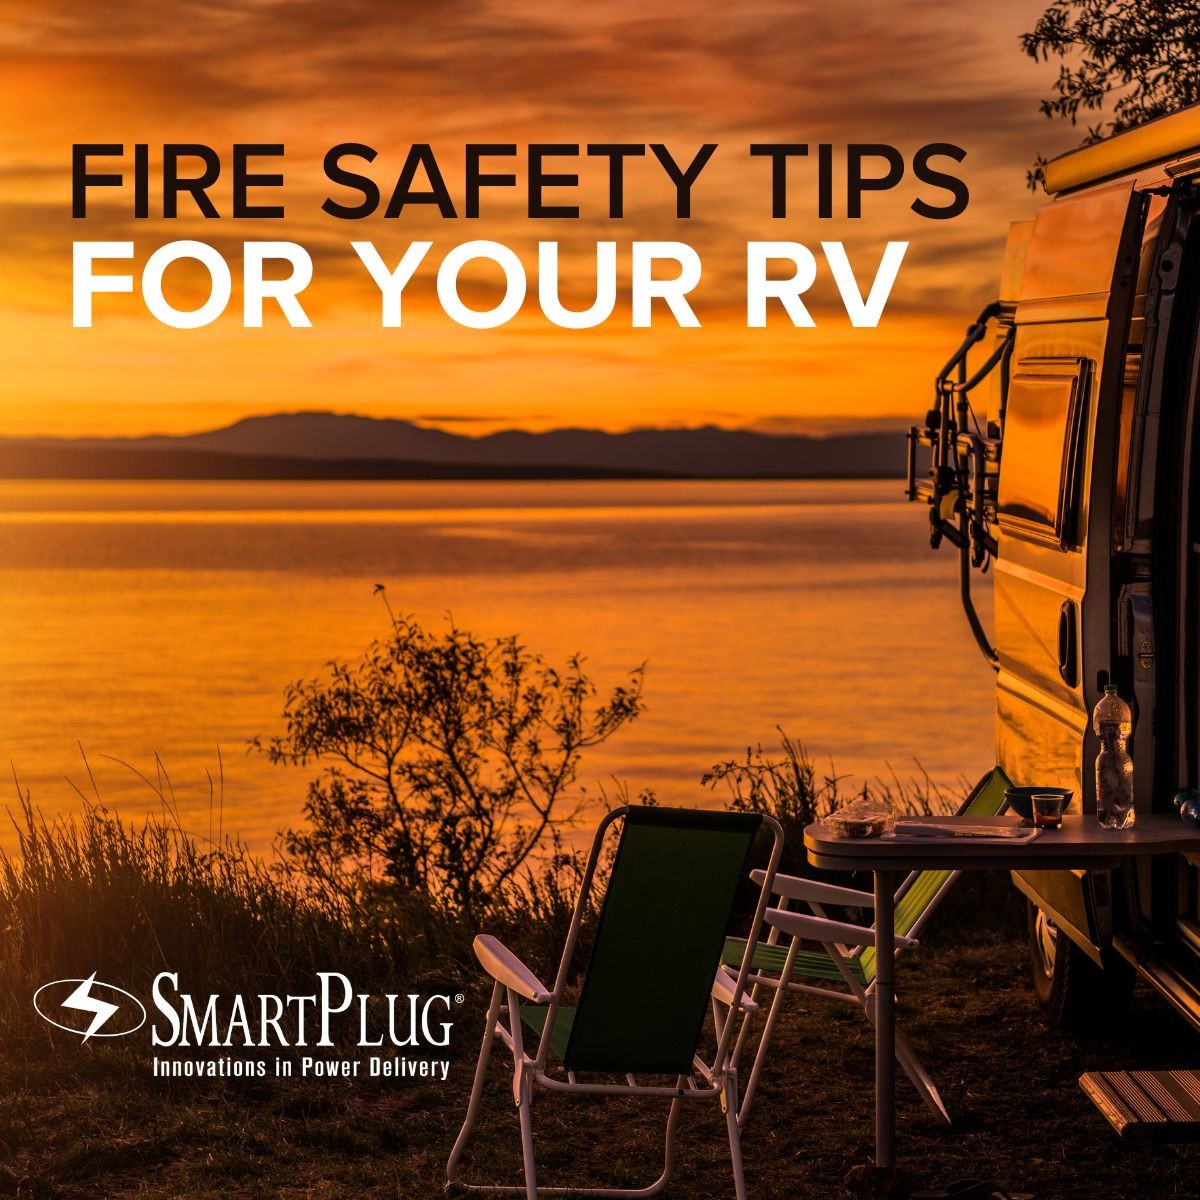 Fires break out in RVs more often than you think. This is not to deter you from becoming a proud RV owner, but to help educate you on how to best protect yourself and your family from fire danger. Here are some helpful tips. rpb.li/AJZW8

#SmartPlug #RVSafety